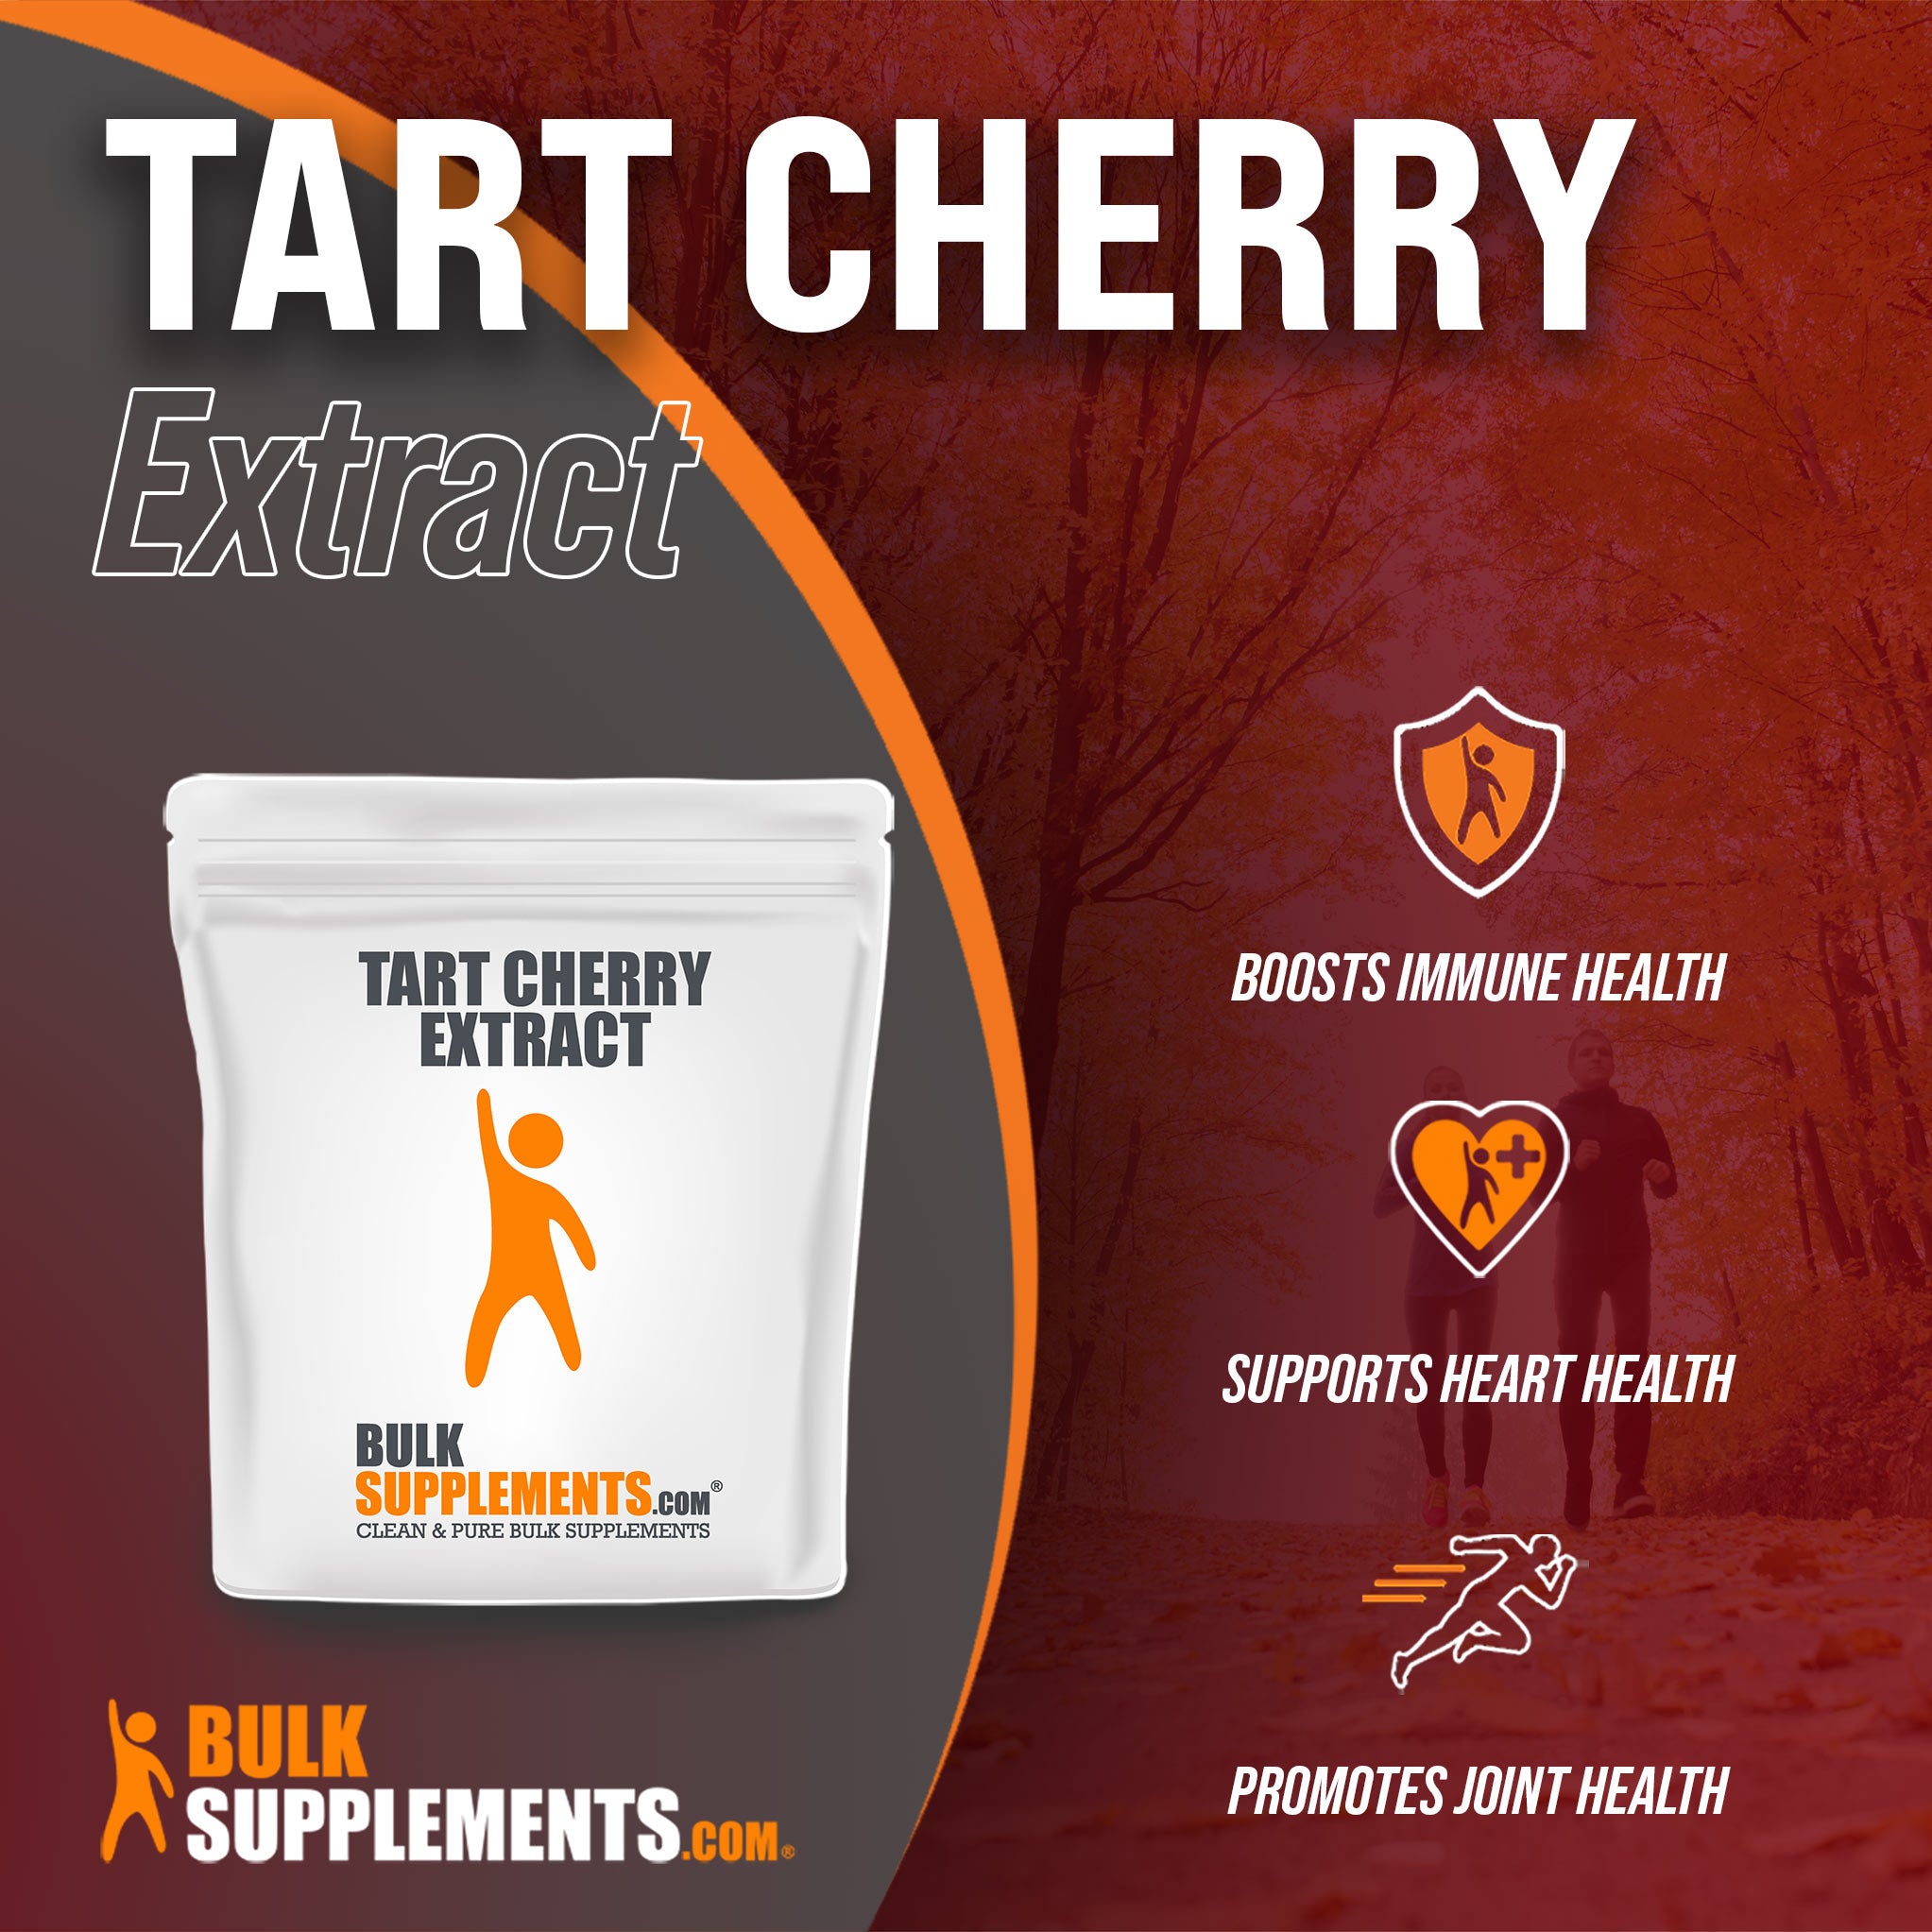 Benefits of Tart Cherry Extract: boosts immune health, supports heart health, promotes joint health